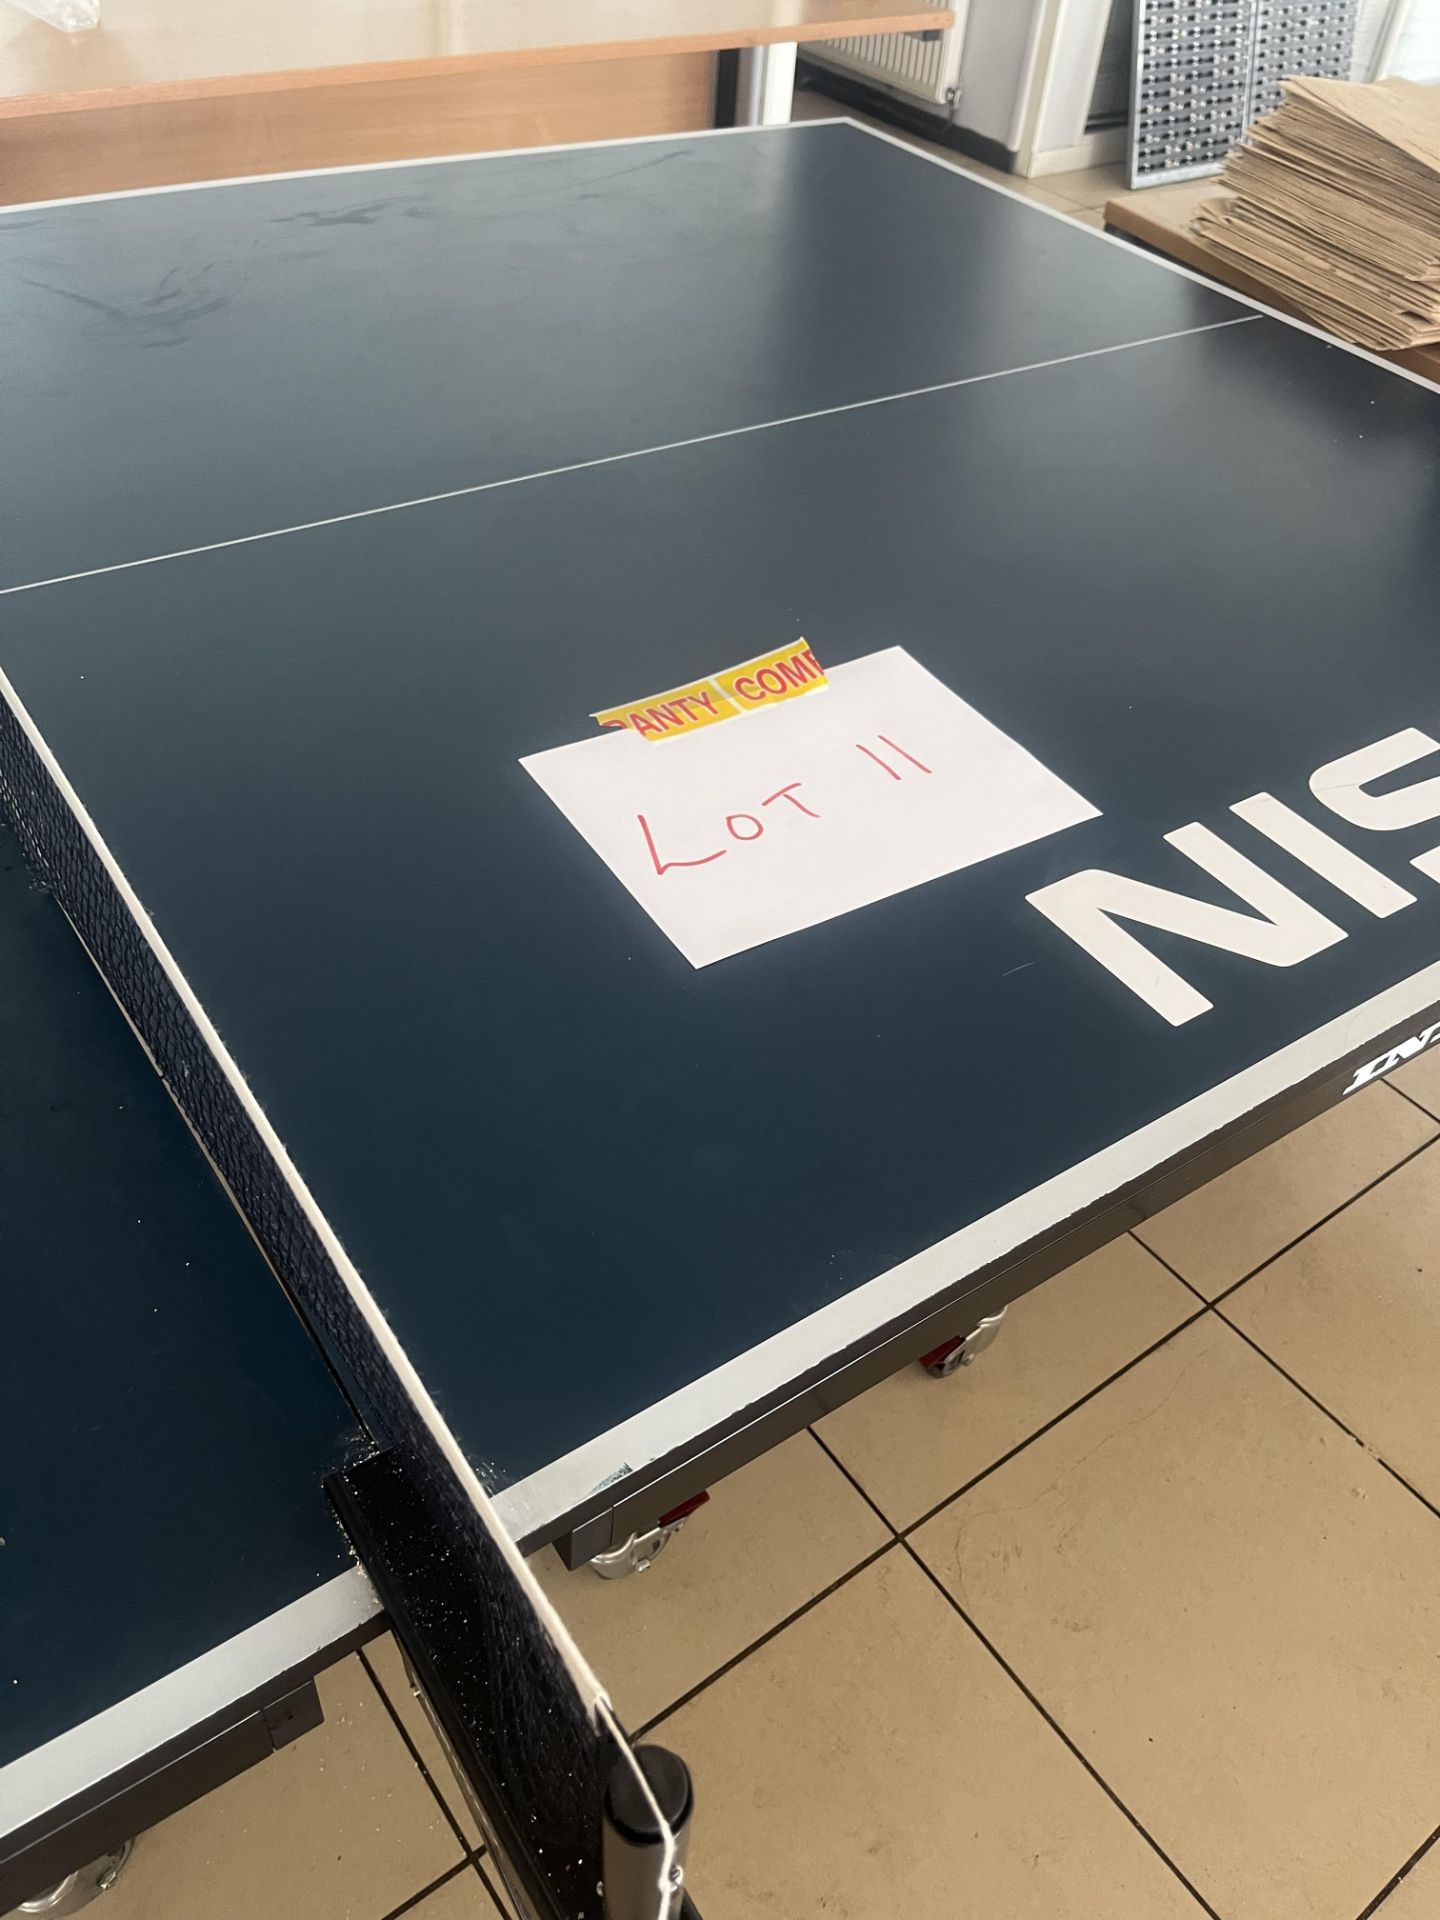 Nissan fold away table tennis table complete with two bats and four balls - Image 4 of 8